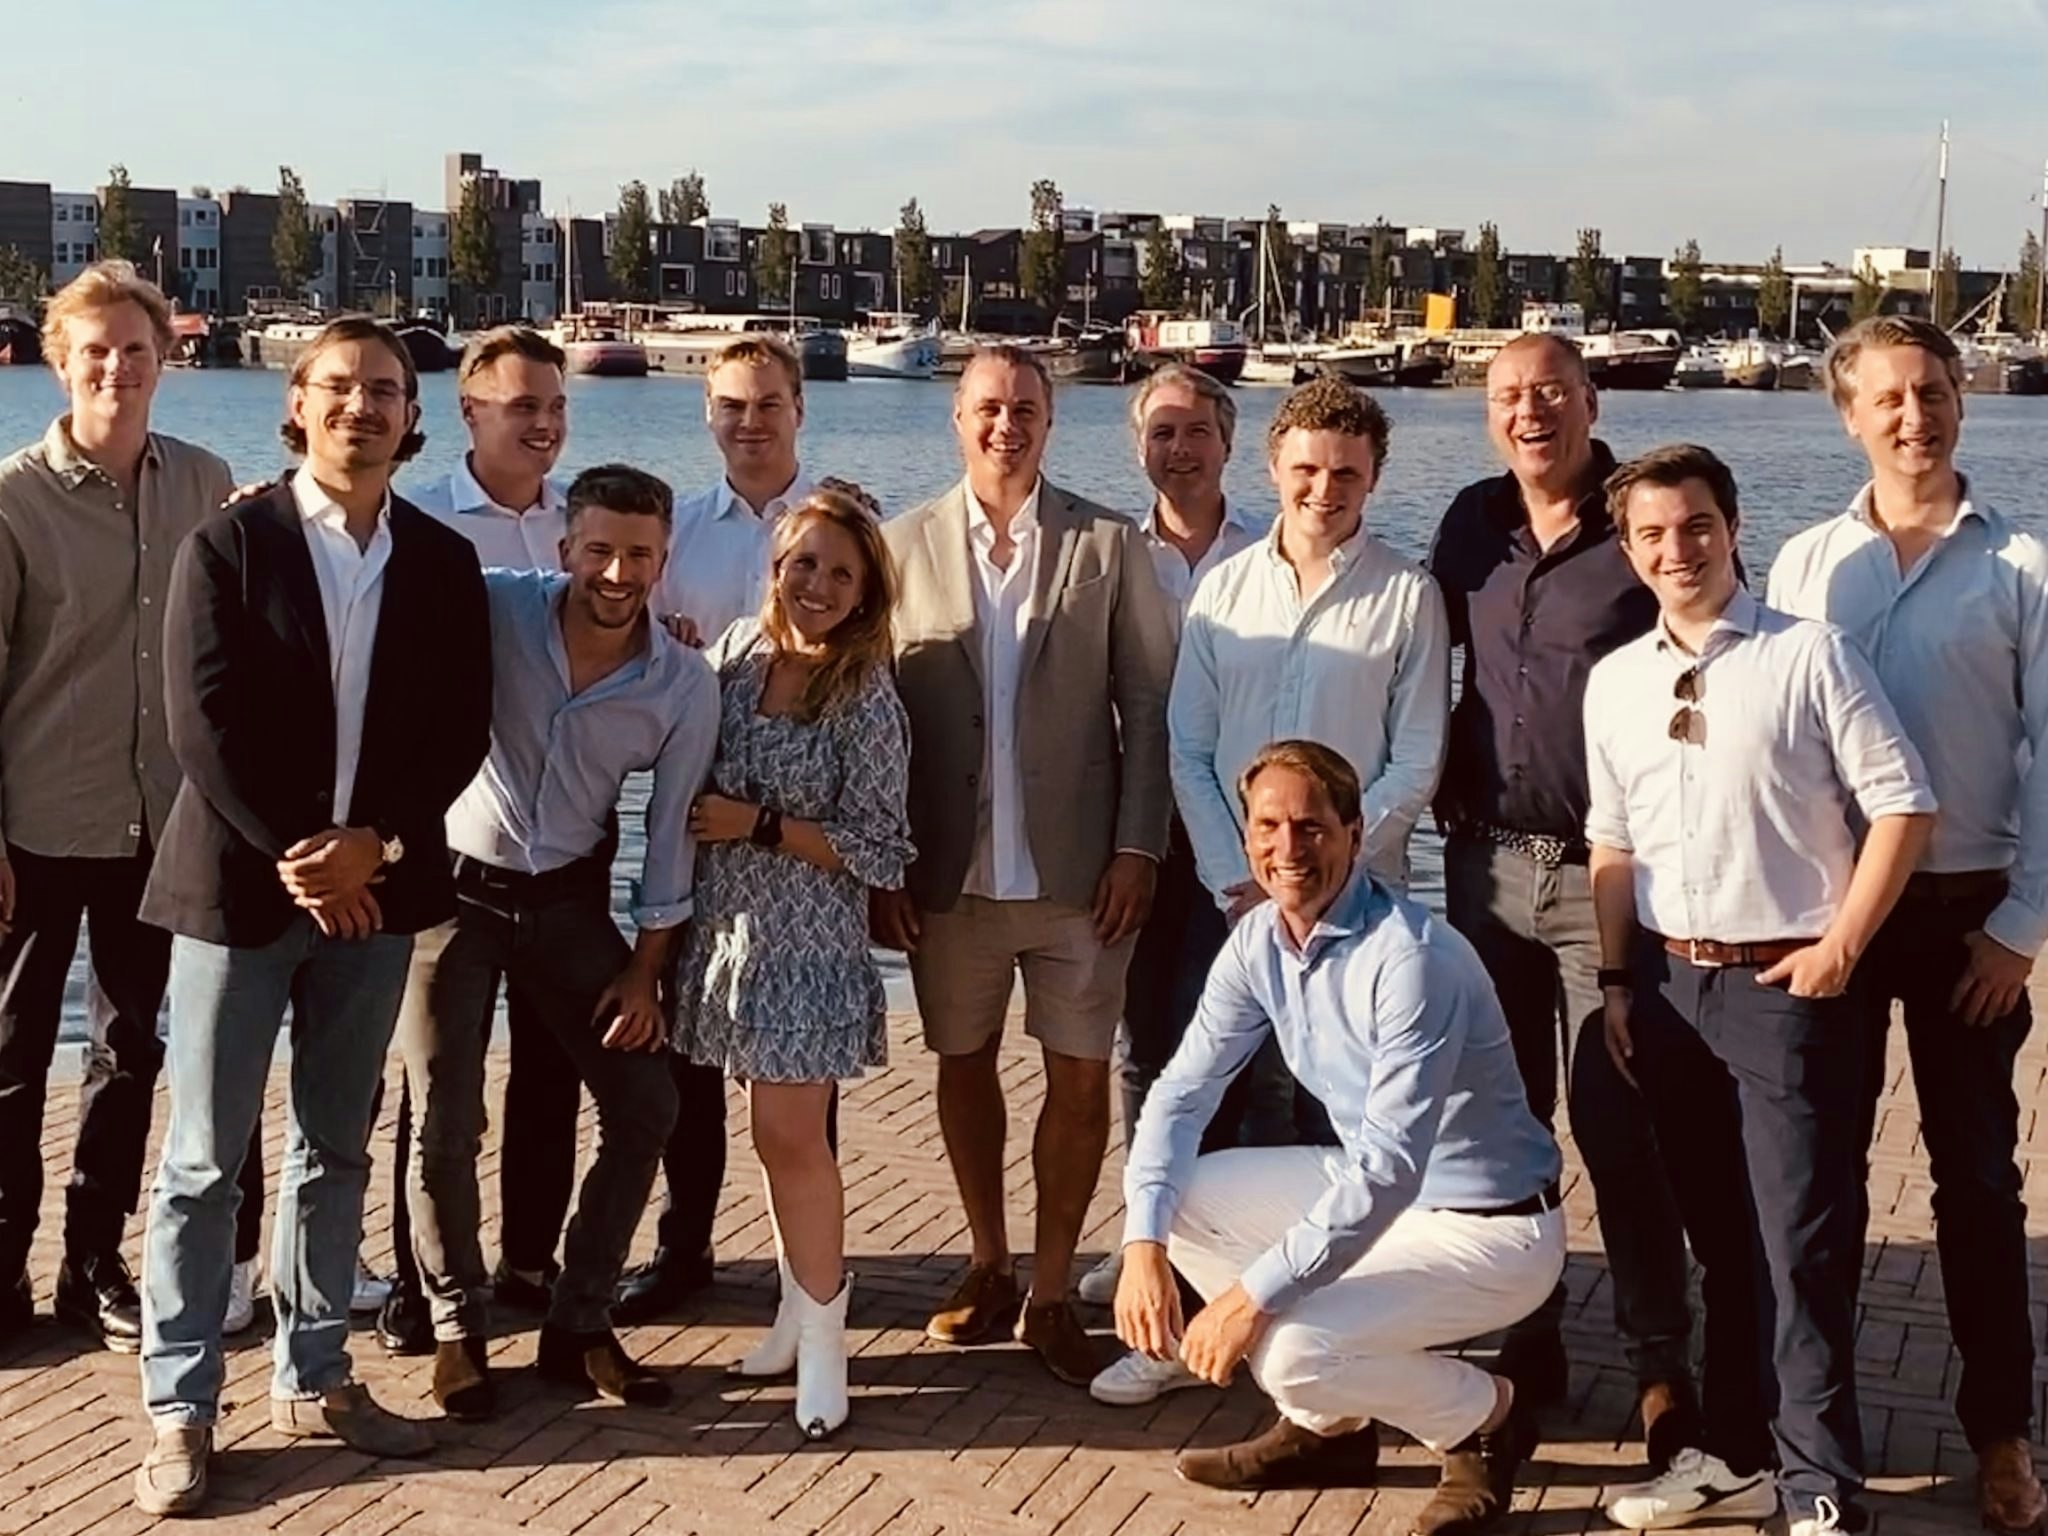 Maven 11 Capital, one of the top early-stage investors in the Netherlands